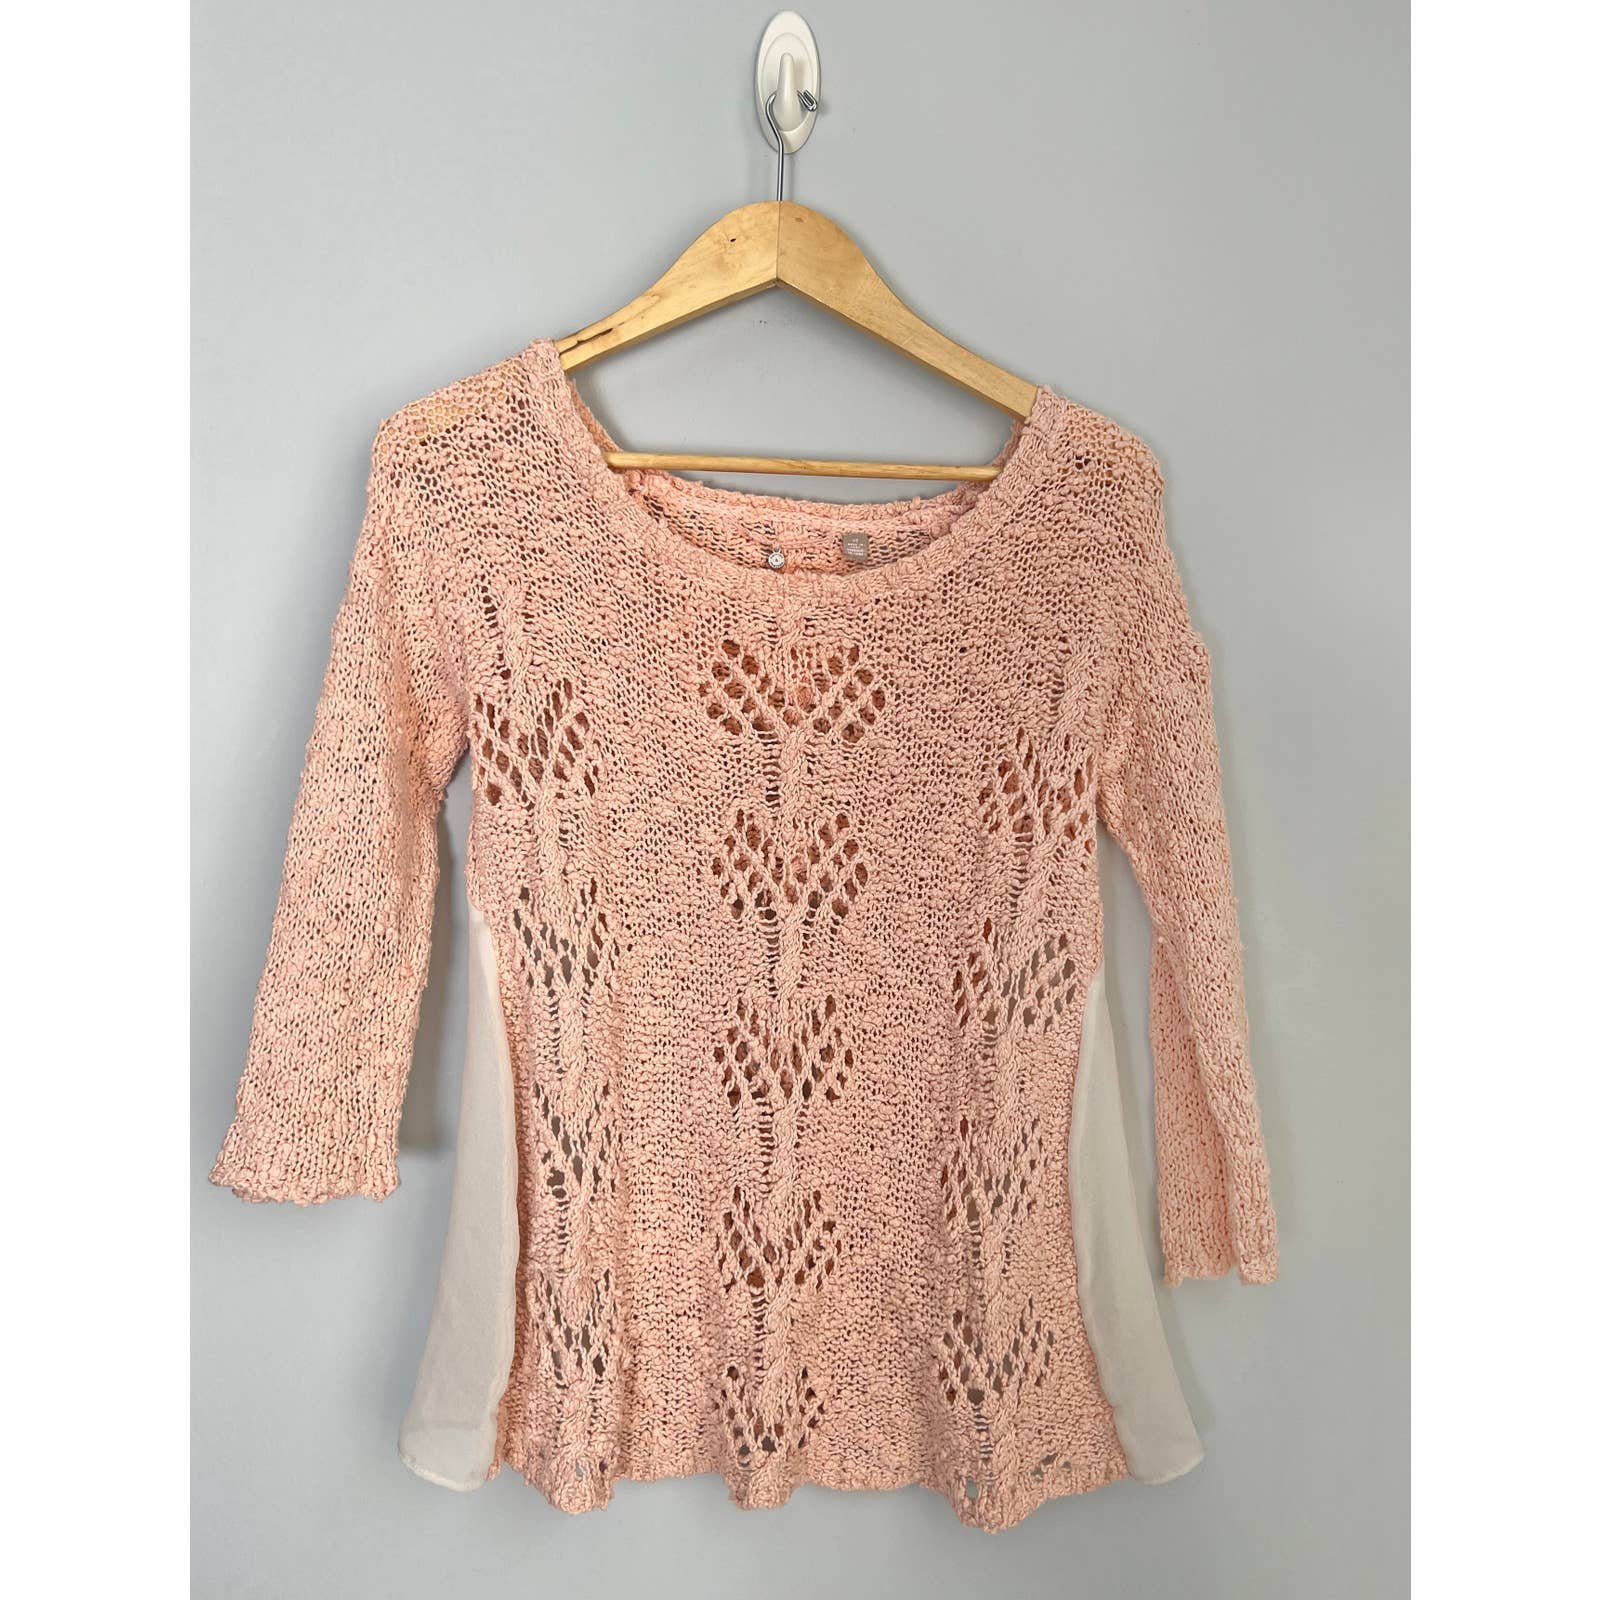 Exclusive ANTHROPOLOGIE KNITTED AND KNOTTED sz XS pink 